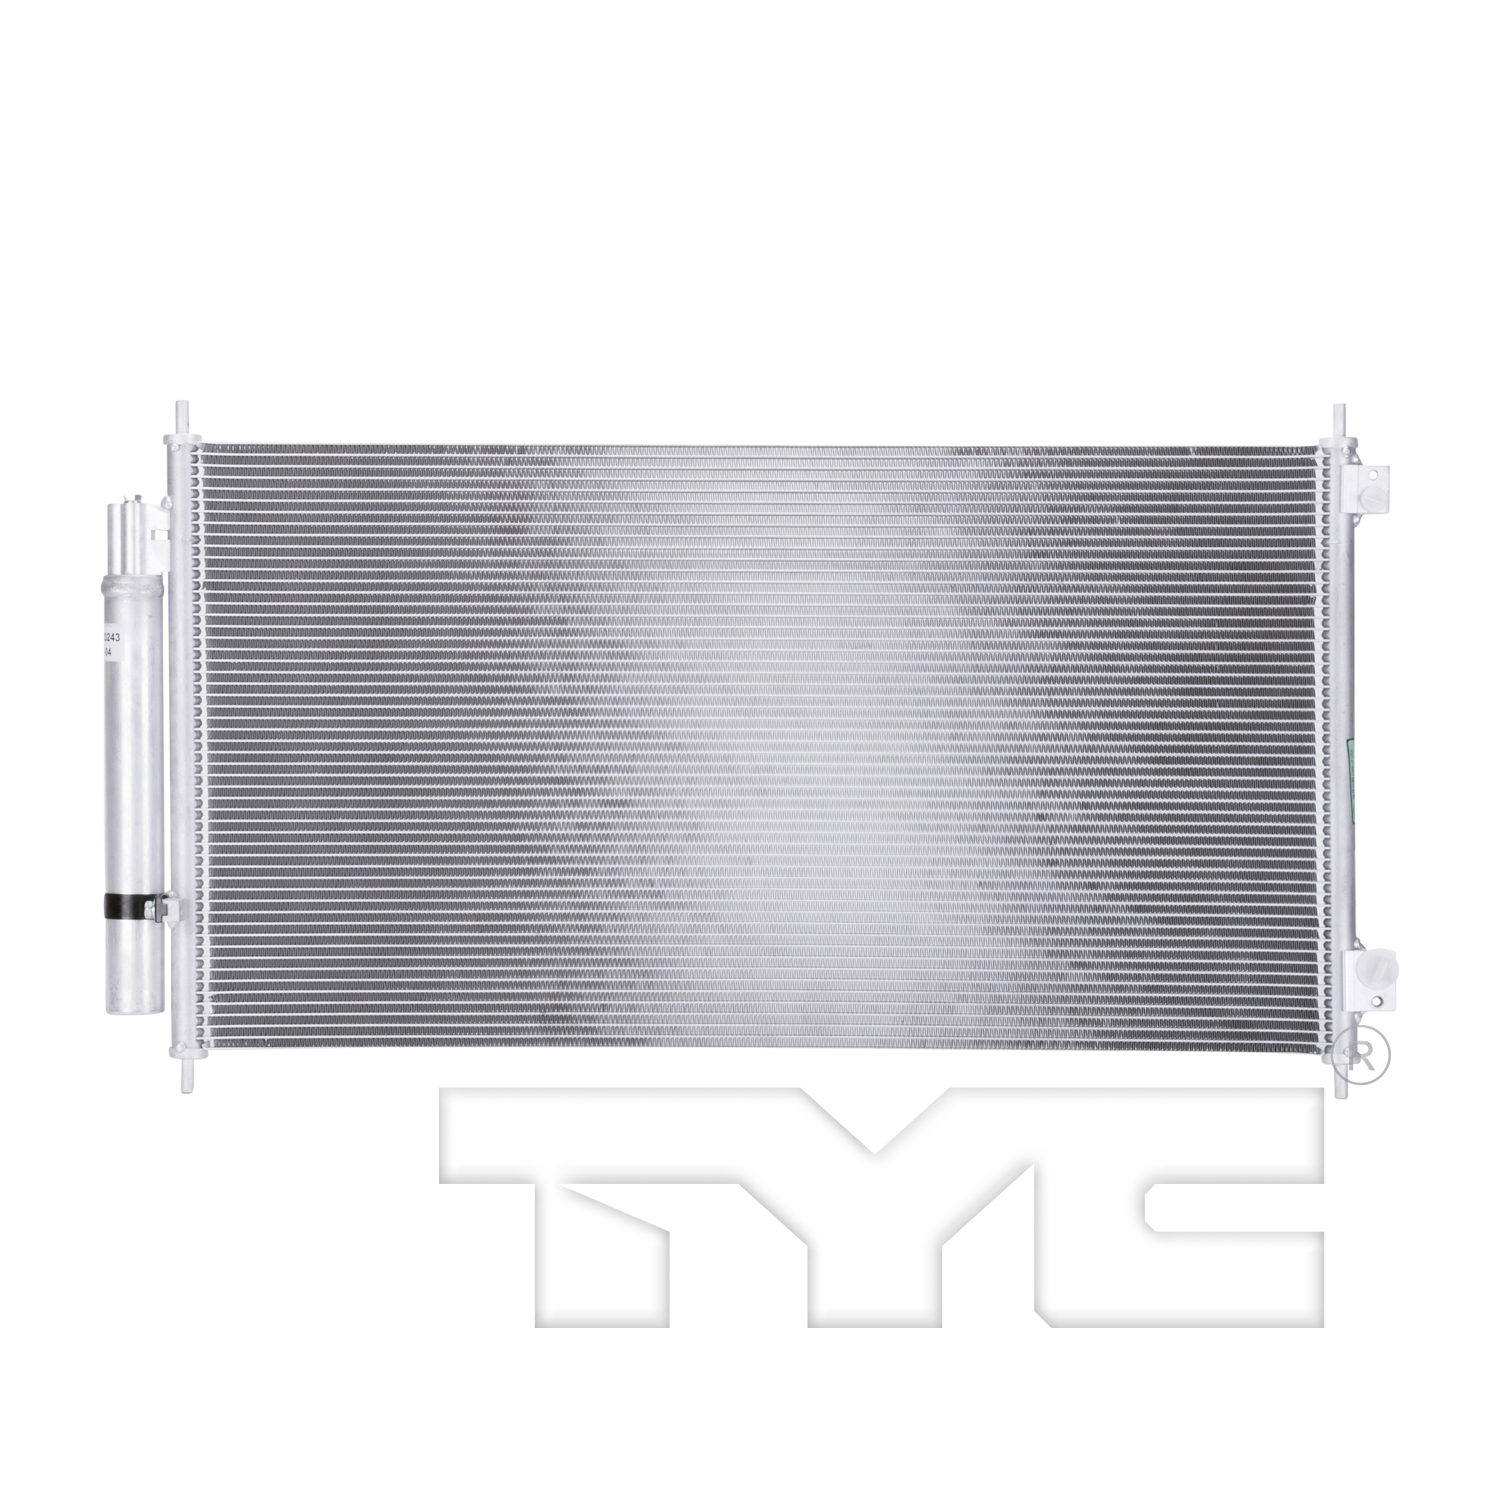 Aftermarket AC CONDENSERS for HONDA - ACCORD, ACCORD,08-12,Air conditioning condenser